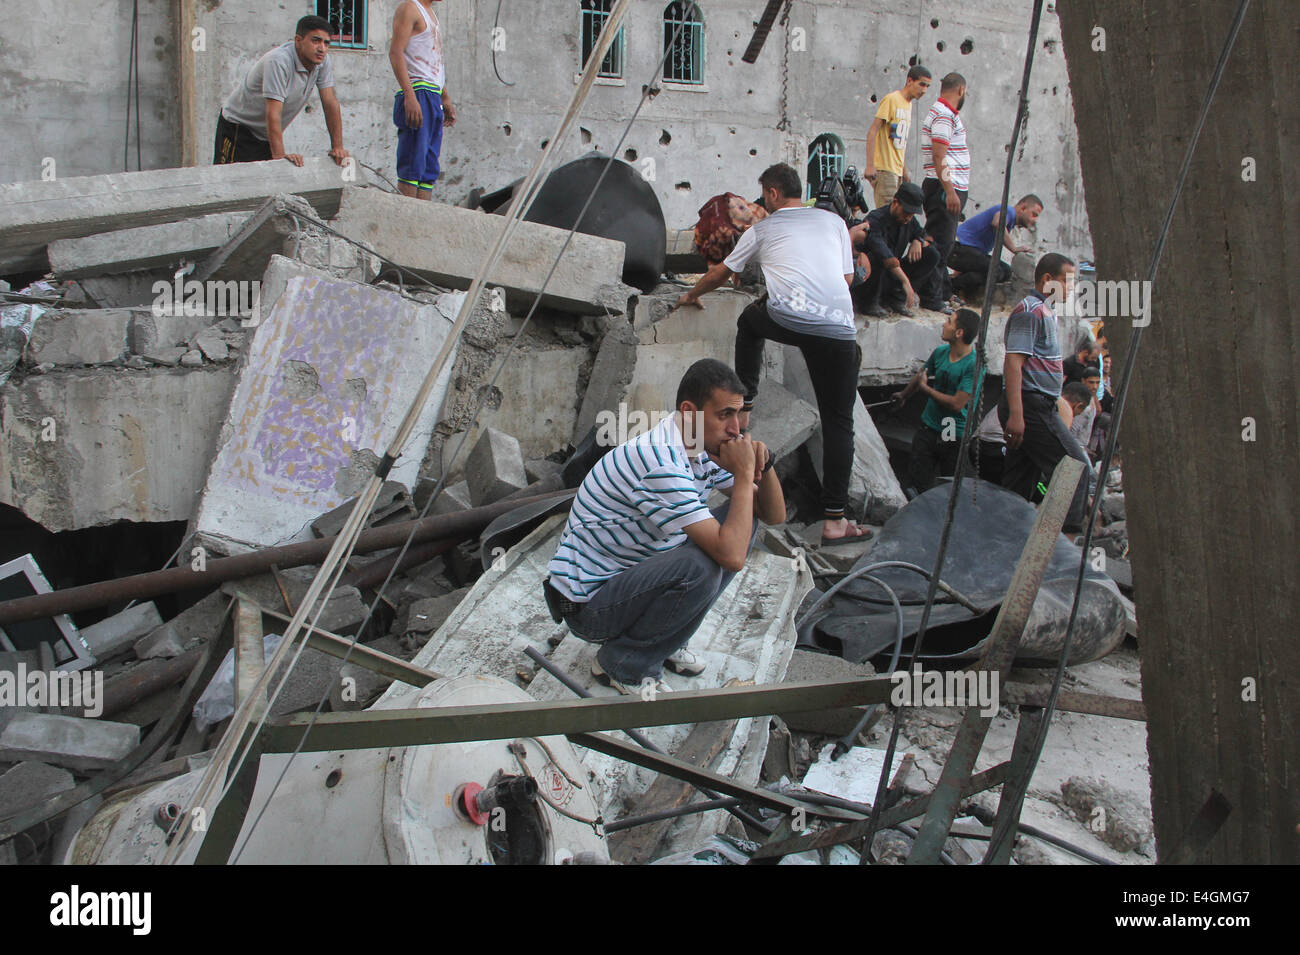 Gaza. 11th July, 2014. Palestinians inspect the rubble of a building after it was targeted in an Israeli airstrike early on July 11, 2014, in the southern Gaza strip city of Rafah. At least 88 Palestinians were killed and 660 injured over the past three days, according to Gaza medical officials. Credit:  Khaled Omar/Xinhua/Alamy Live News Stock Photo